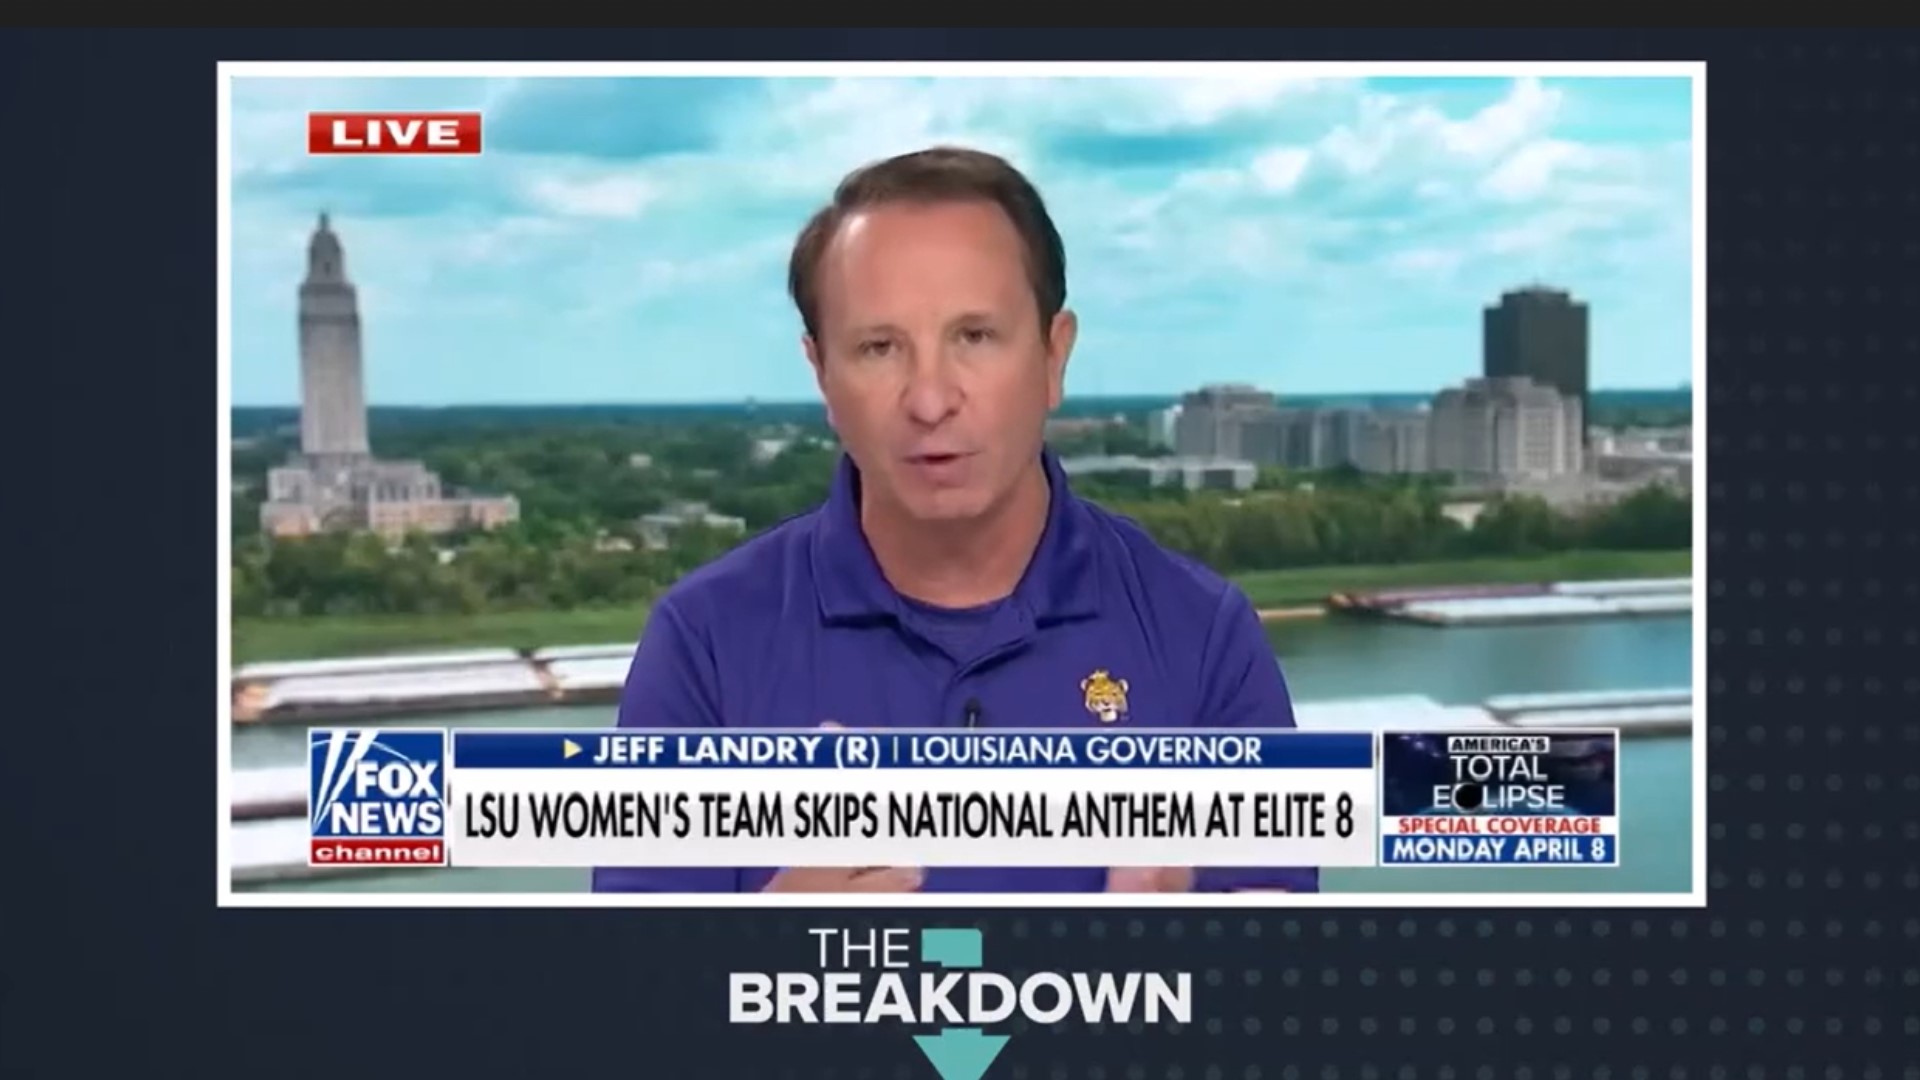 In your Breakdown: Governor Jeff Landry wants scholarships stripped from athletes who miss the National Anthem.